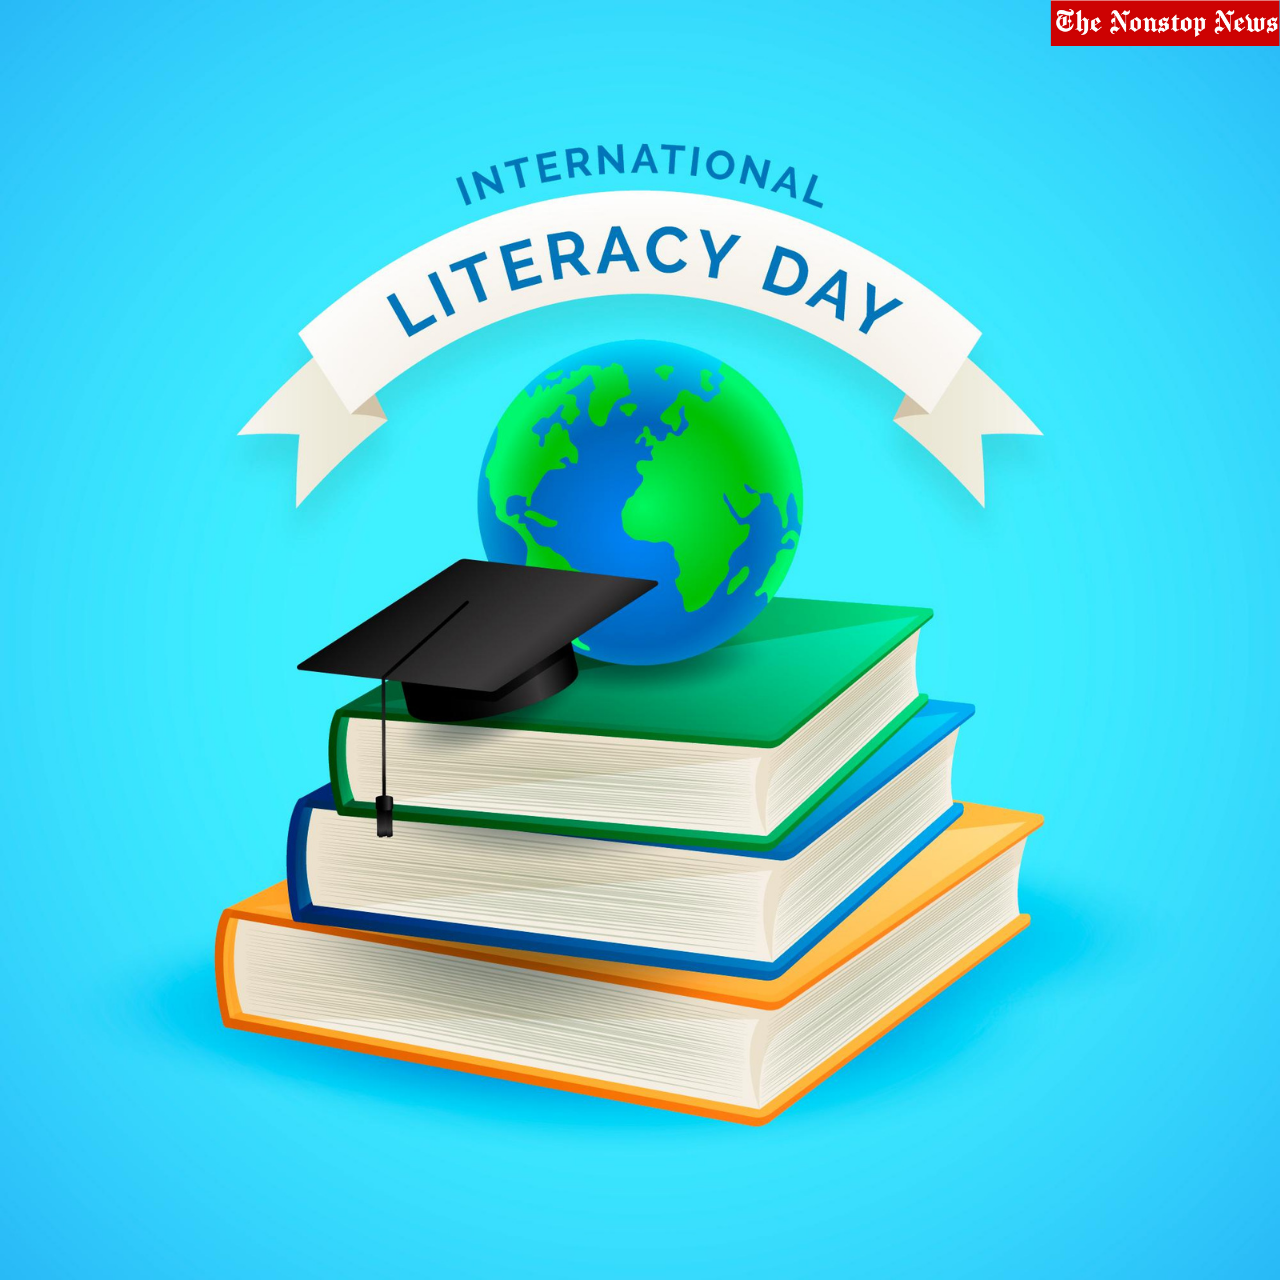 International Literacy Day 2021 Quotes, Poster, HD Images, Messages, and Status to share